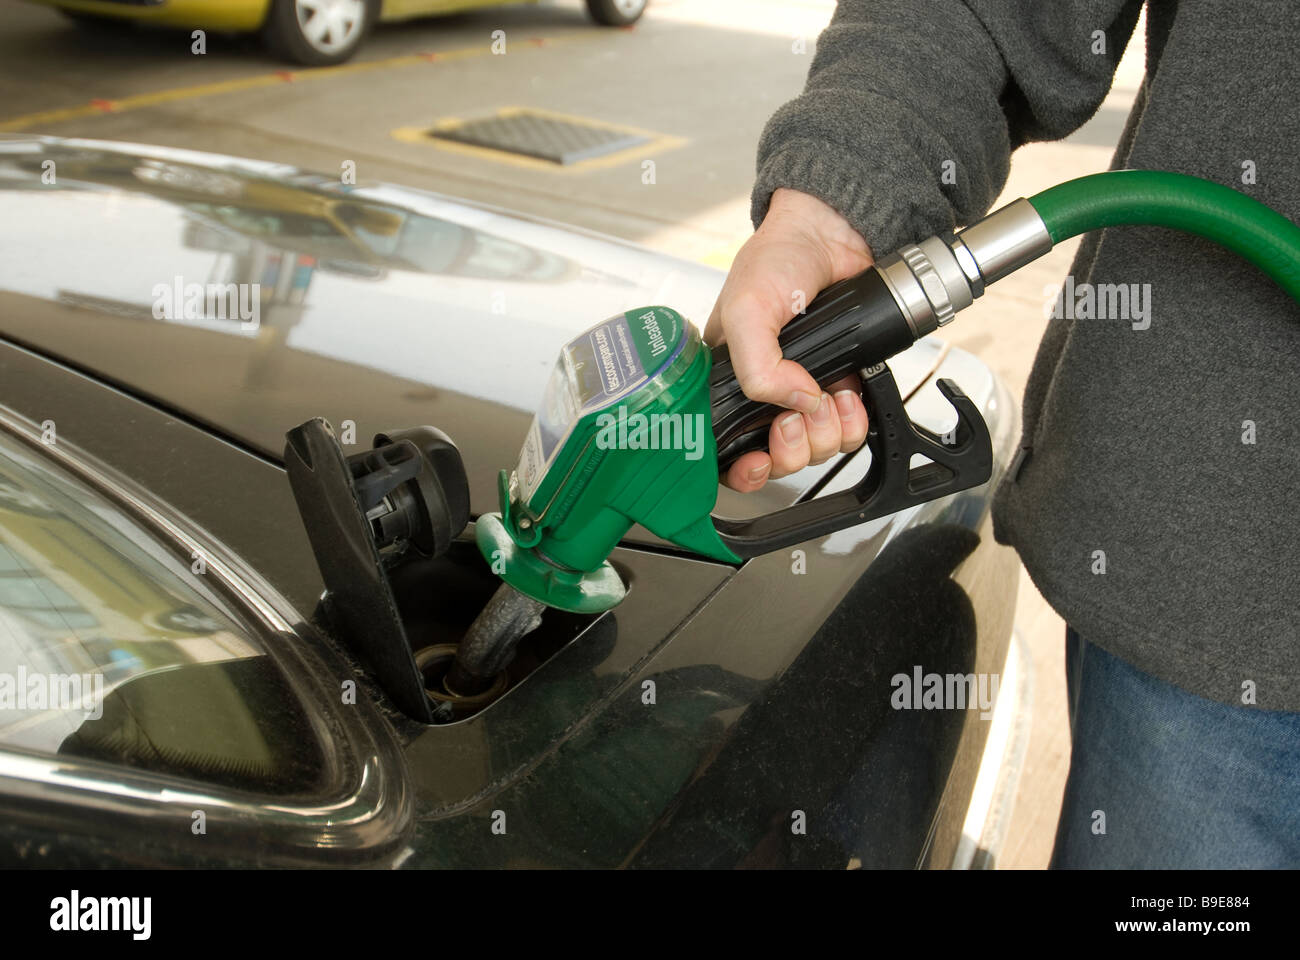 filling up with petrol Stock Photo